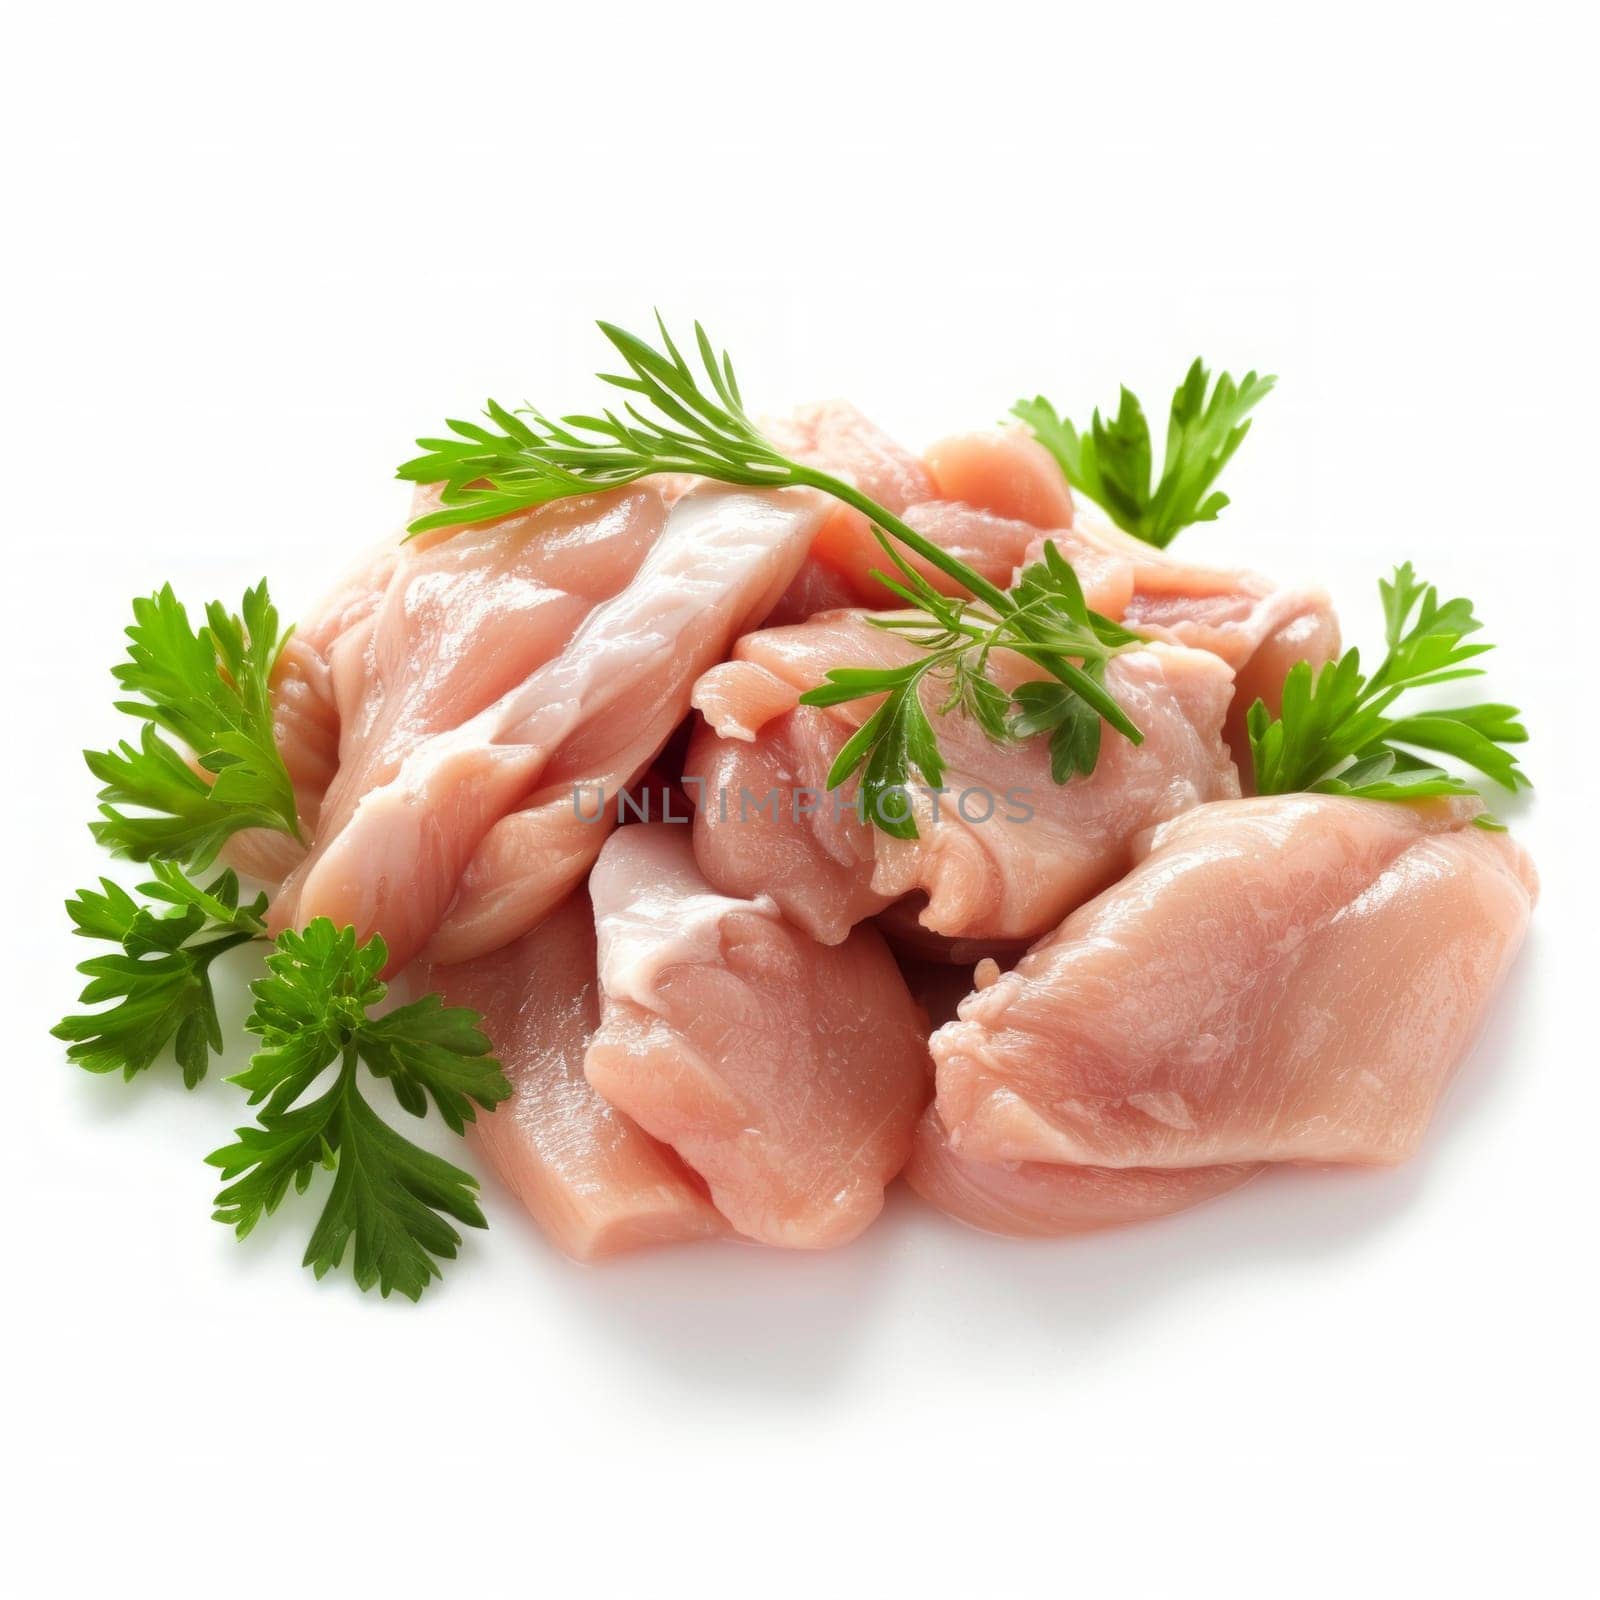 raw chicken pieces with parsley isolated on white background by papatonic